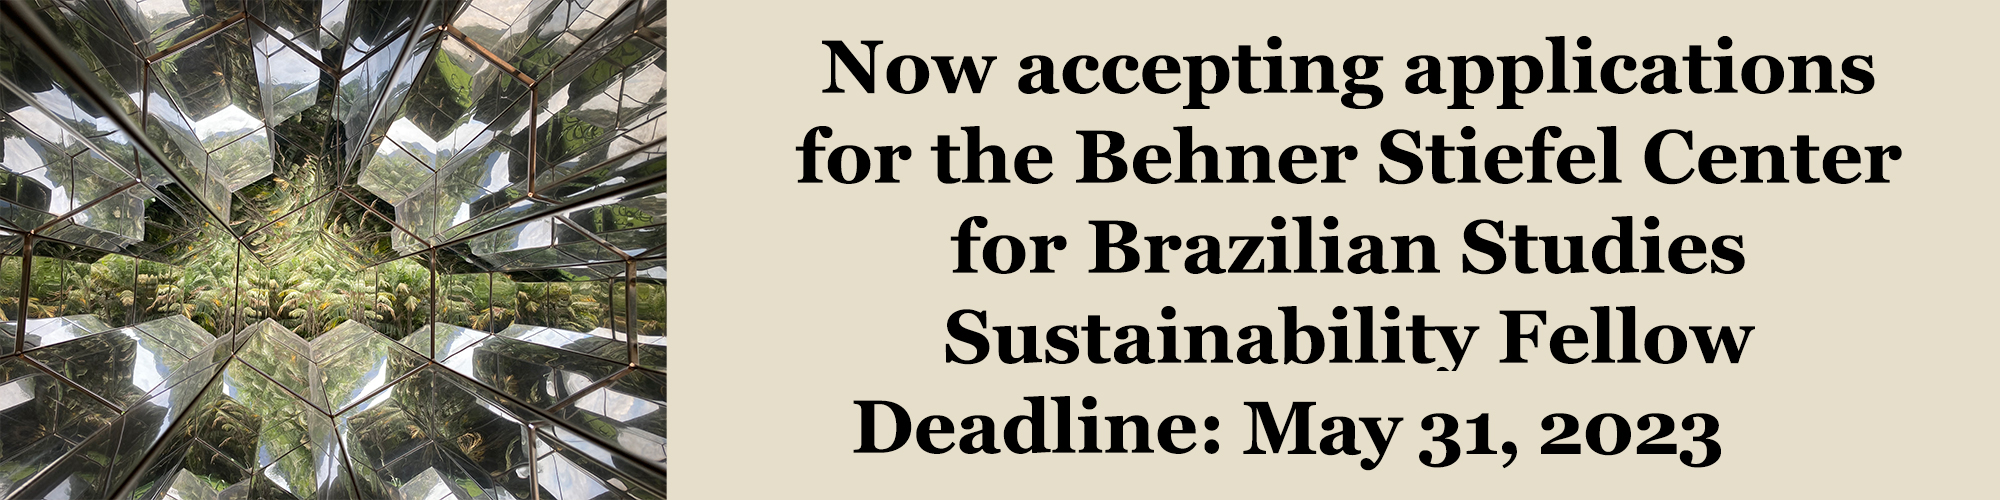 Now accepting applications for Brazilian Studies Sustainability Fellow. Apply by May 21, 2023.